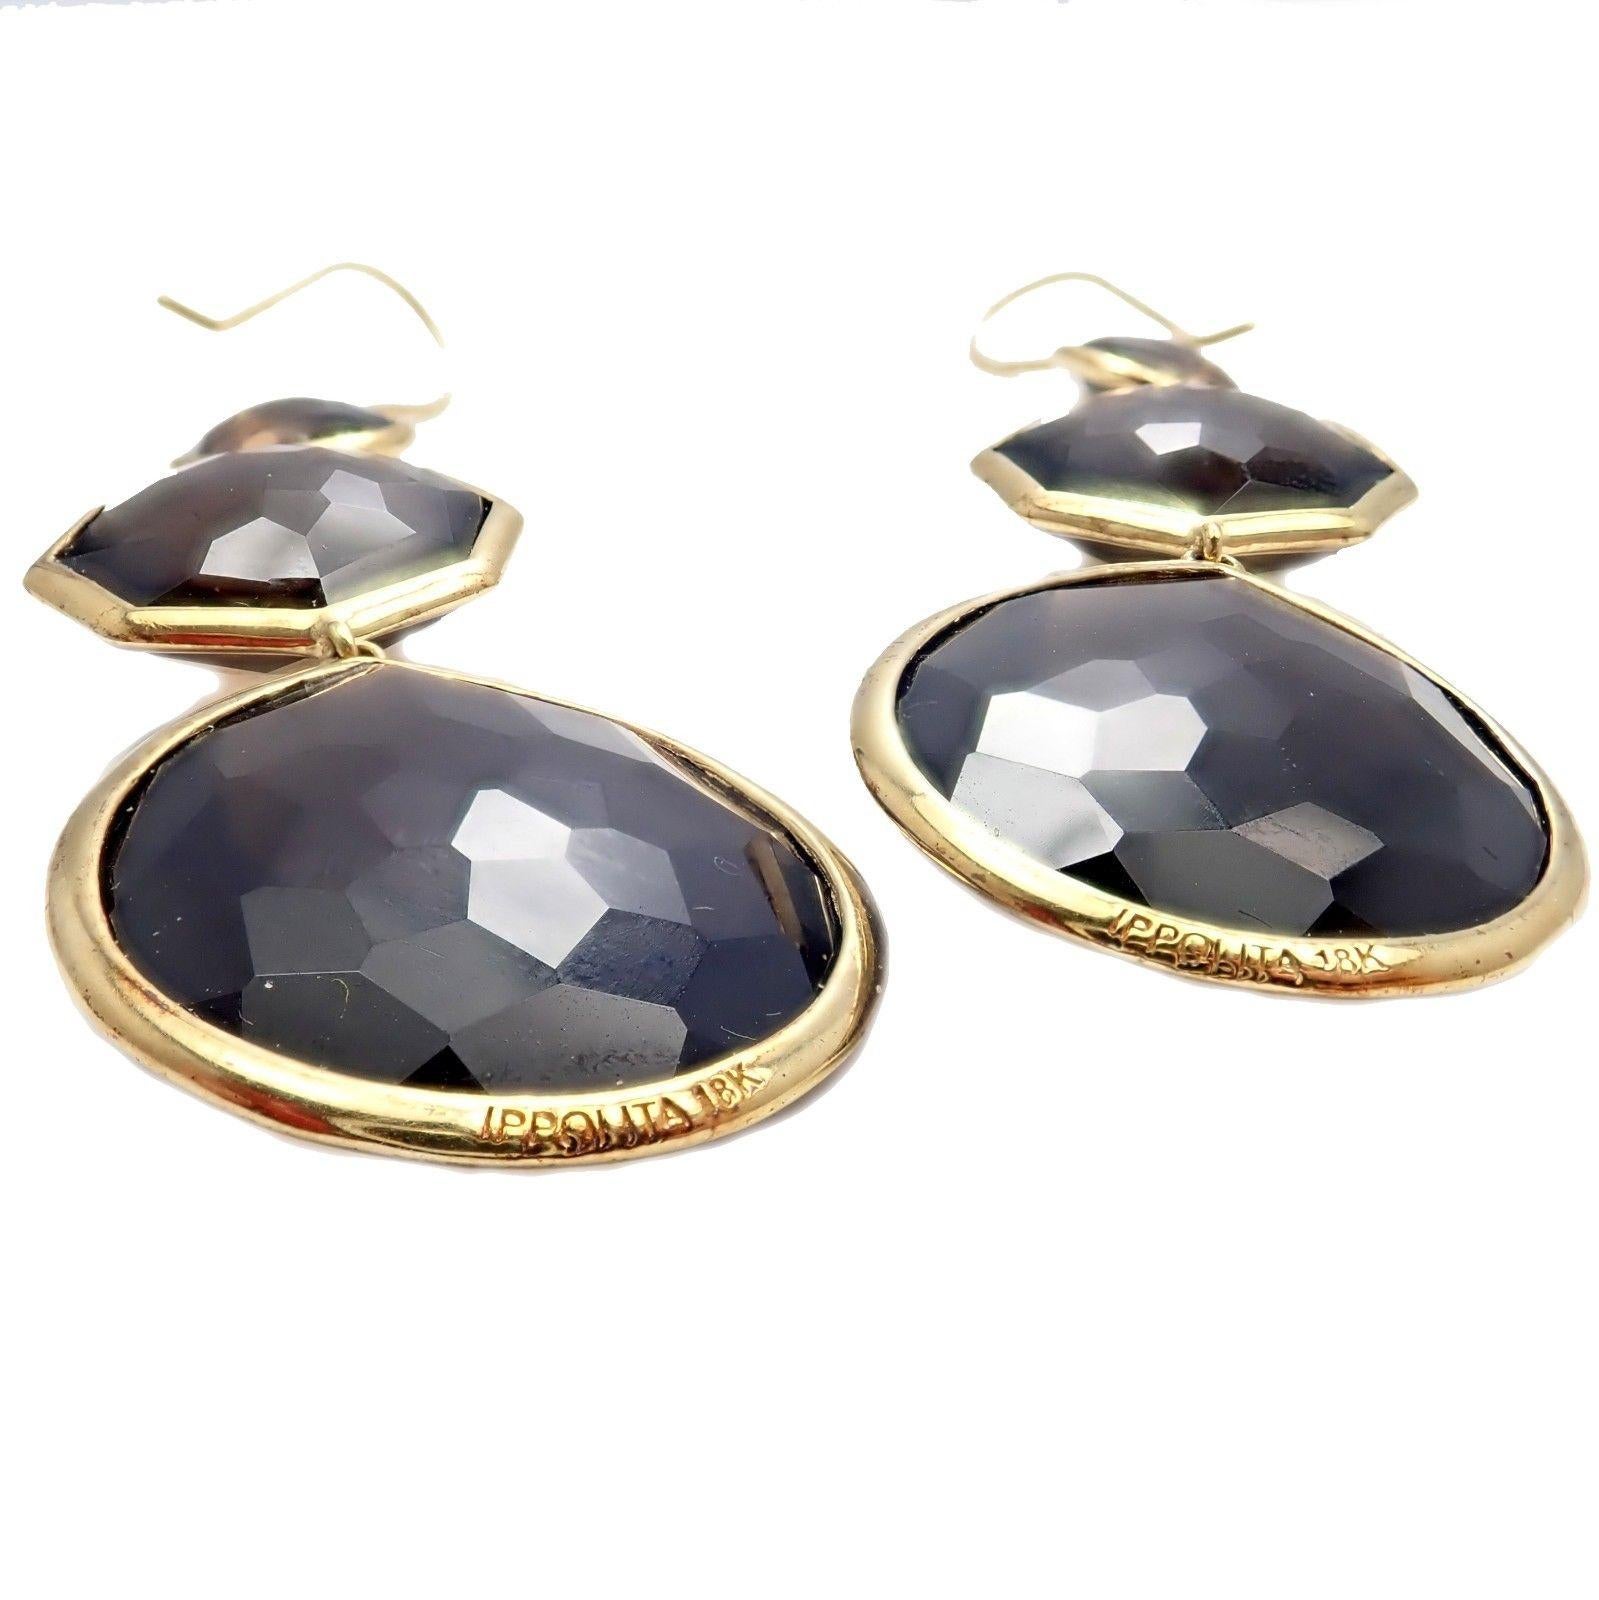 18k Yellow Gold Rock Candy Extra Large Smoky Quartz Drop Yellow Gold Earrings by Ippolita. 
With Smoky Quartz Stone Sizes
2 - 18mm x 24mm
2 - 15mm x 15mm
2 - 9mm x 9mm
Details: 
Measurements: 22mm x 75mm
Weight: 18.7 grams
Stamped Hallmarks: